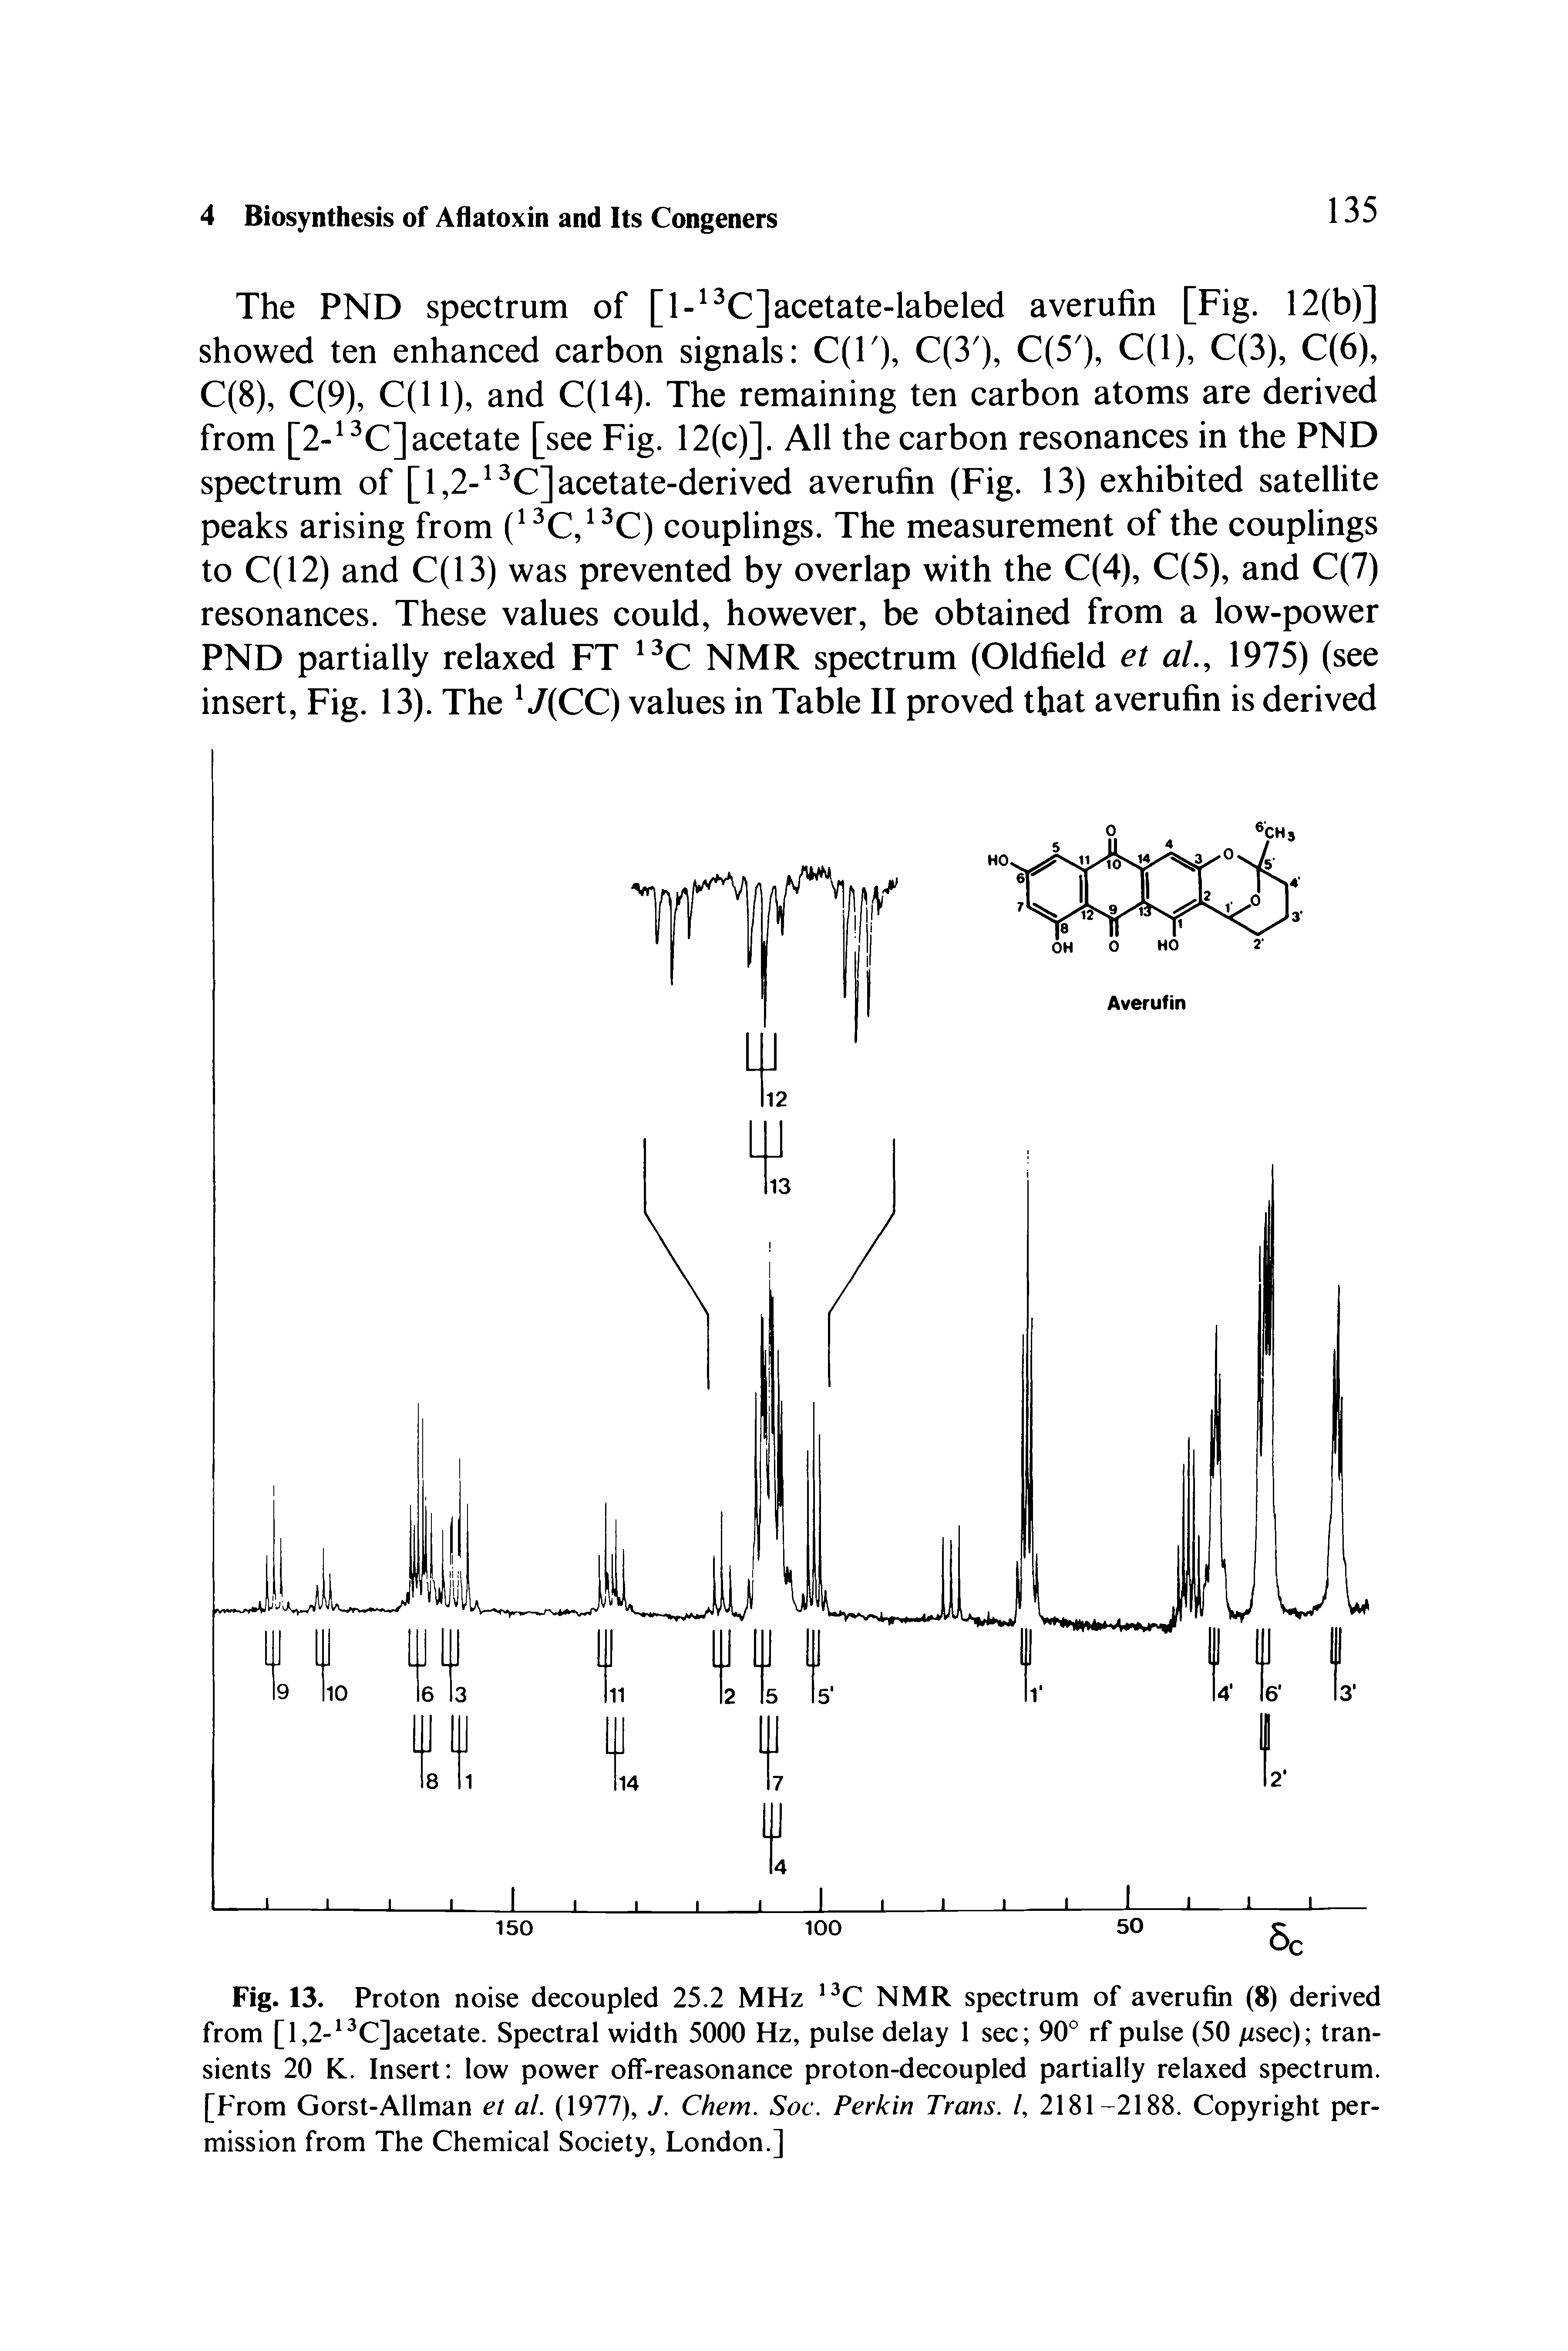 Fig. 13. Proton noise decoupled 25.2 MHz NMR spectrum of averufin (8) derived from [l,2- C]acetate. Spectral width 5000 Hz, pulse delay 1 sec 90° rf pulse (50 /isec) transients 20 K. Insert low power oflf-reasonance proton-decoupled partially relaxed spectrum. [From Gorst-Allman et al. (1977), 7. Chem. Soc. Perkin Trans. /, 2181-2188. Copyright permission from The Chemical Society, London.]...